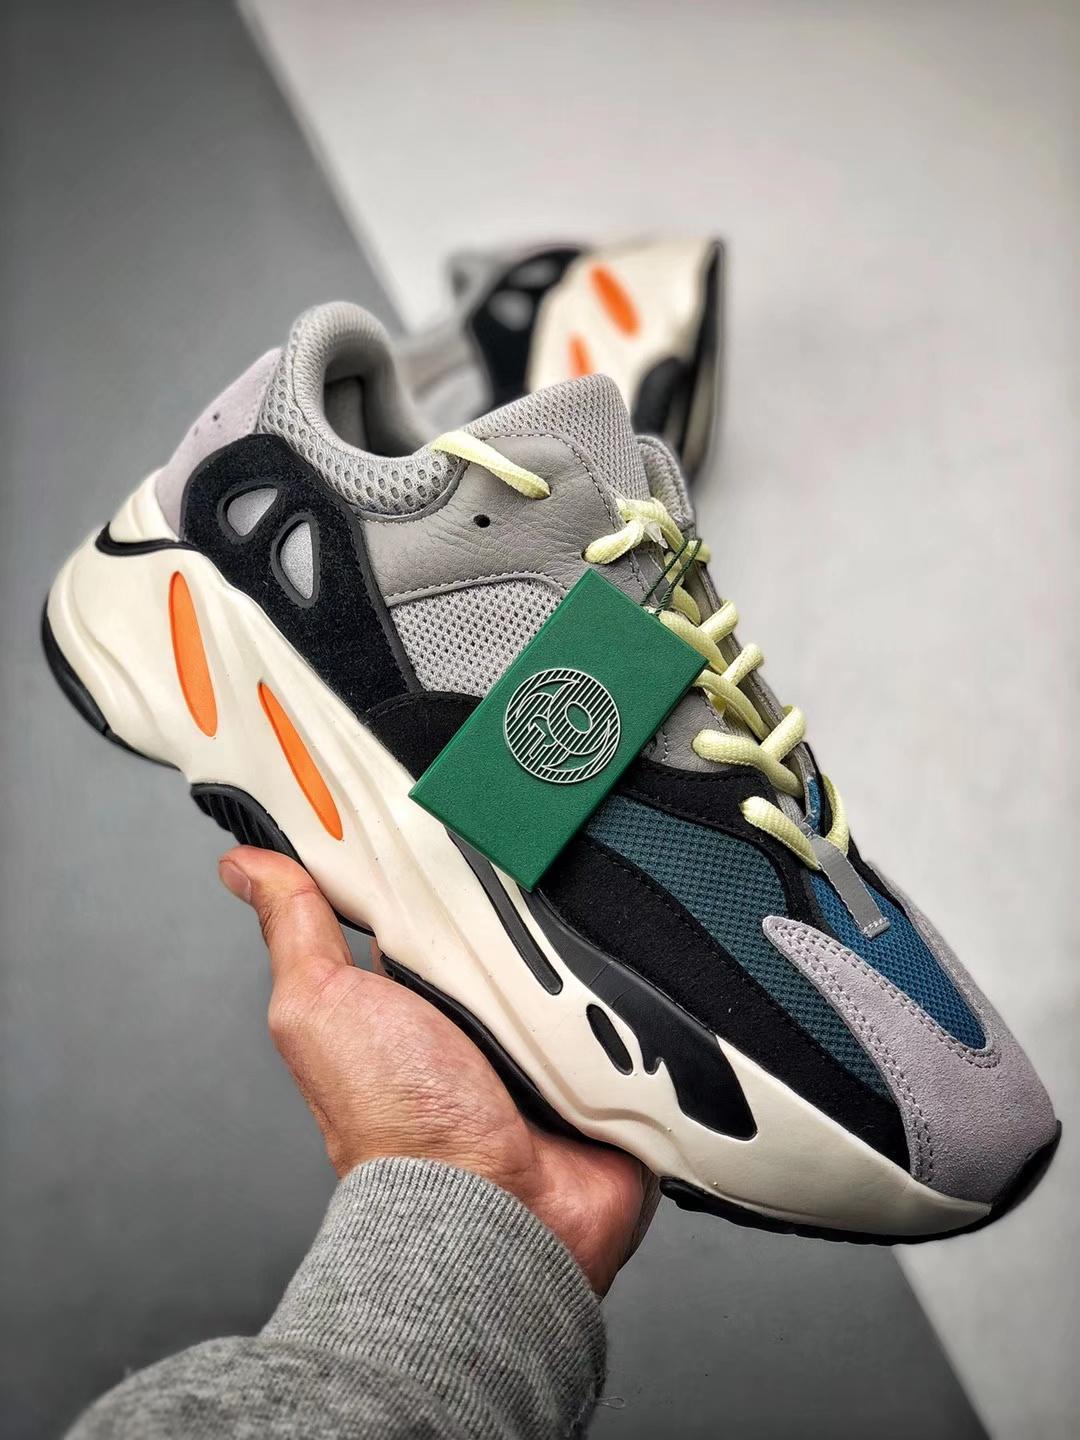 adidas Yeezy Boost 700 “Wave Runner” B75571 For Sale – Sneaker Hello